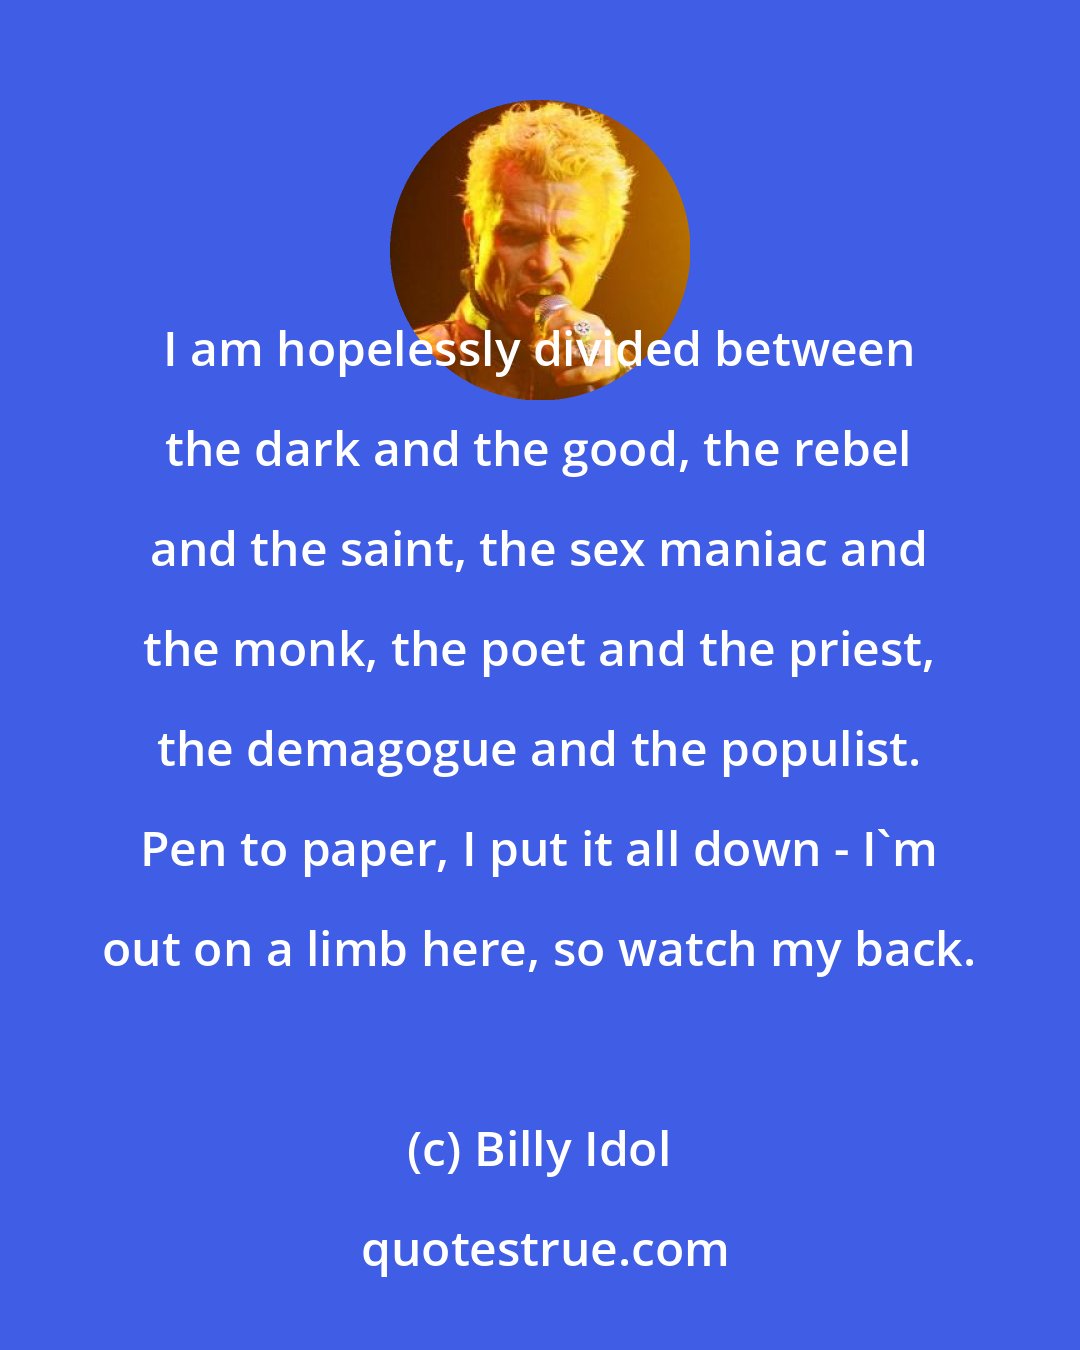 Billy Idol: I am hopelessly divided between the dark and the good, the rebel and the saint, the sex maniac and the monk, the poet and the priest, the demagogue and the populist. Pen to paper, I put it all down - I'm out on a limb here, so watch my back.